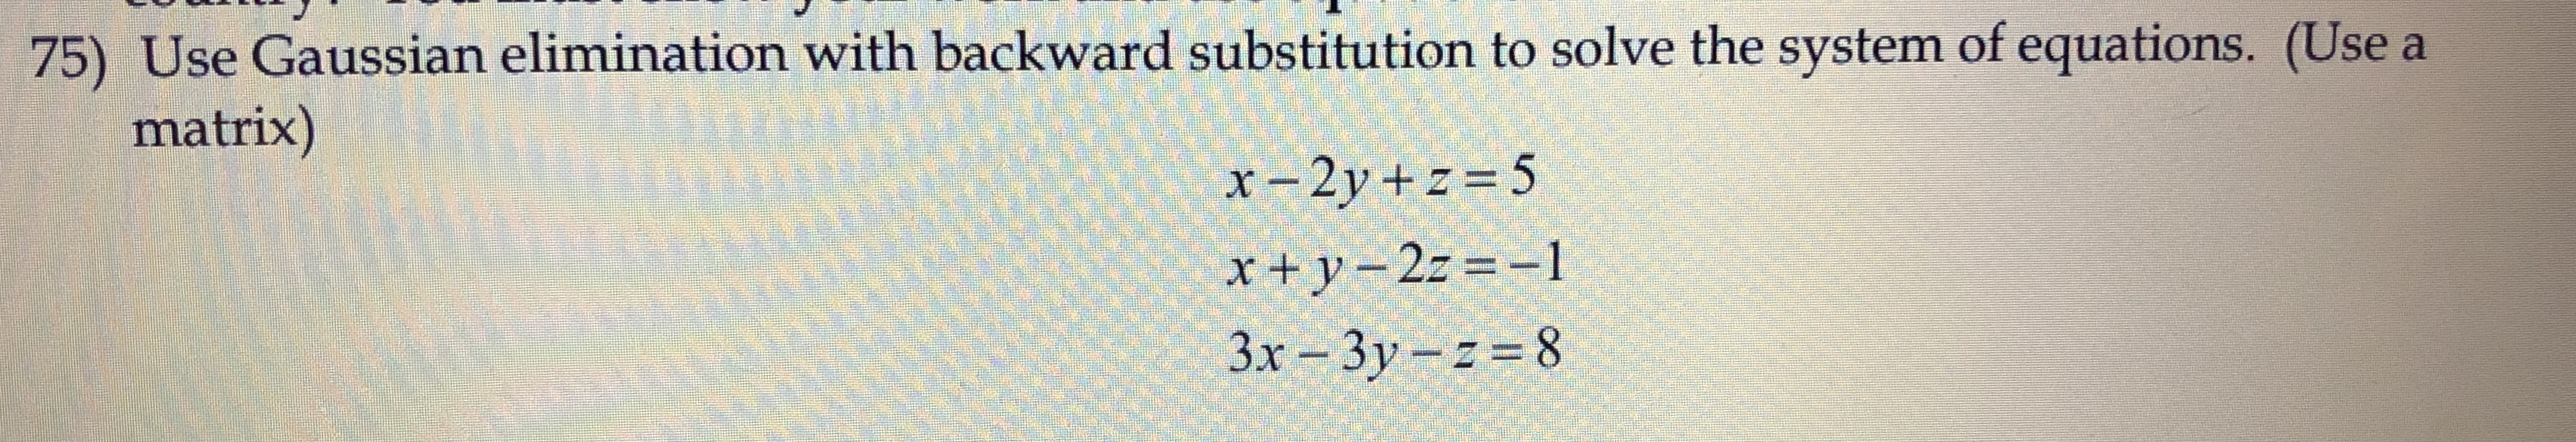 75) Use Gaussian elimination with backward substitution to solve the system of equations. (Use a
matrix)
x-2y + z = 5
x+y-2z =-1
3x-3y-2-8
